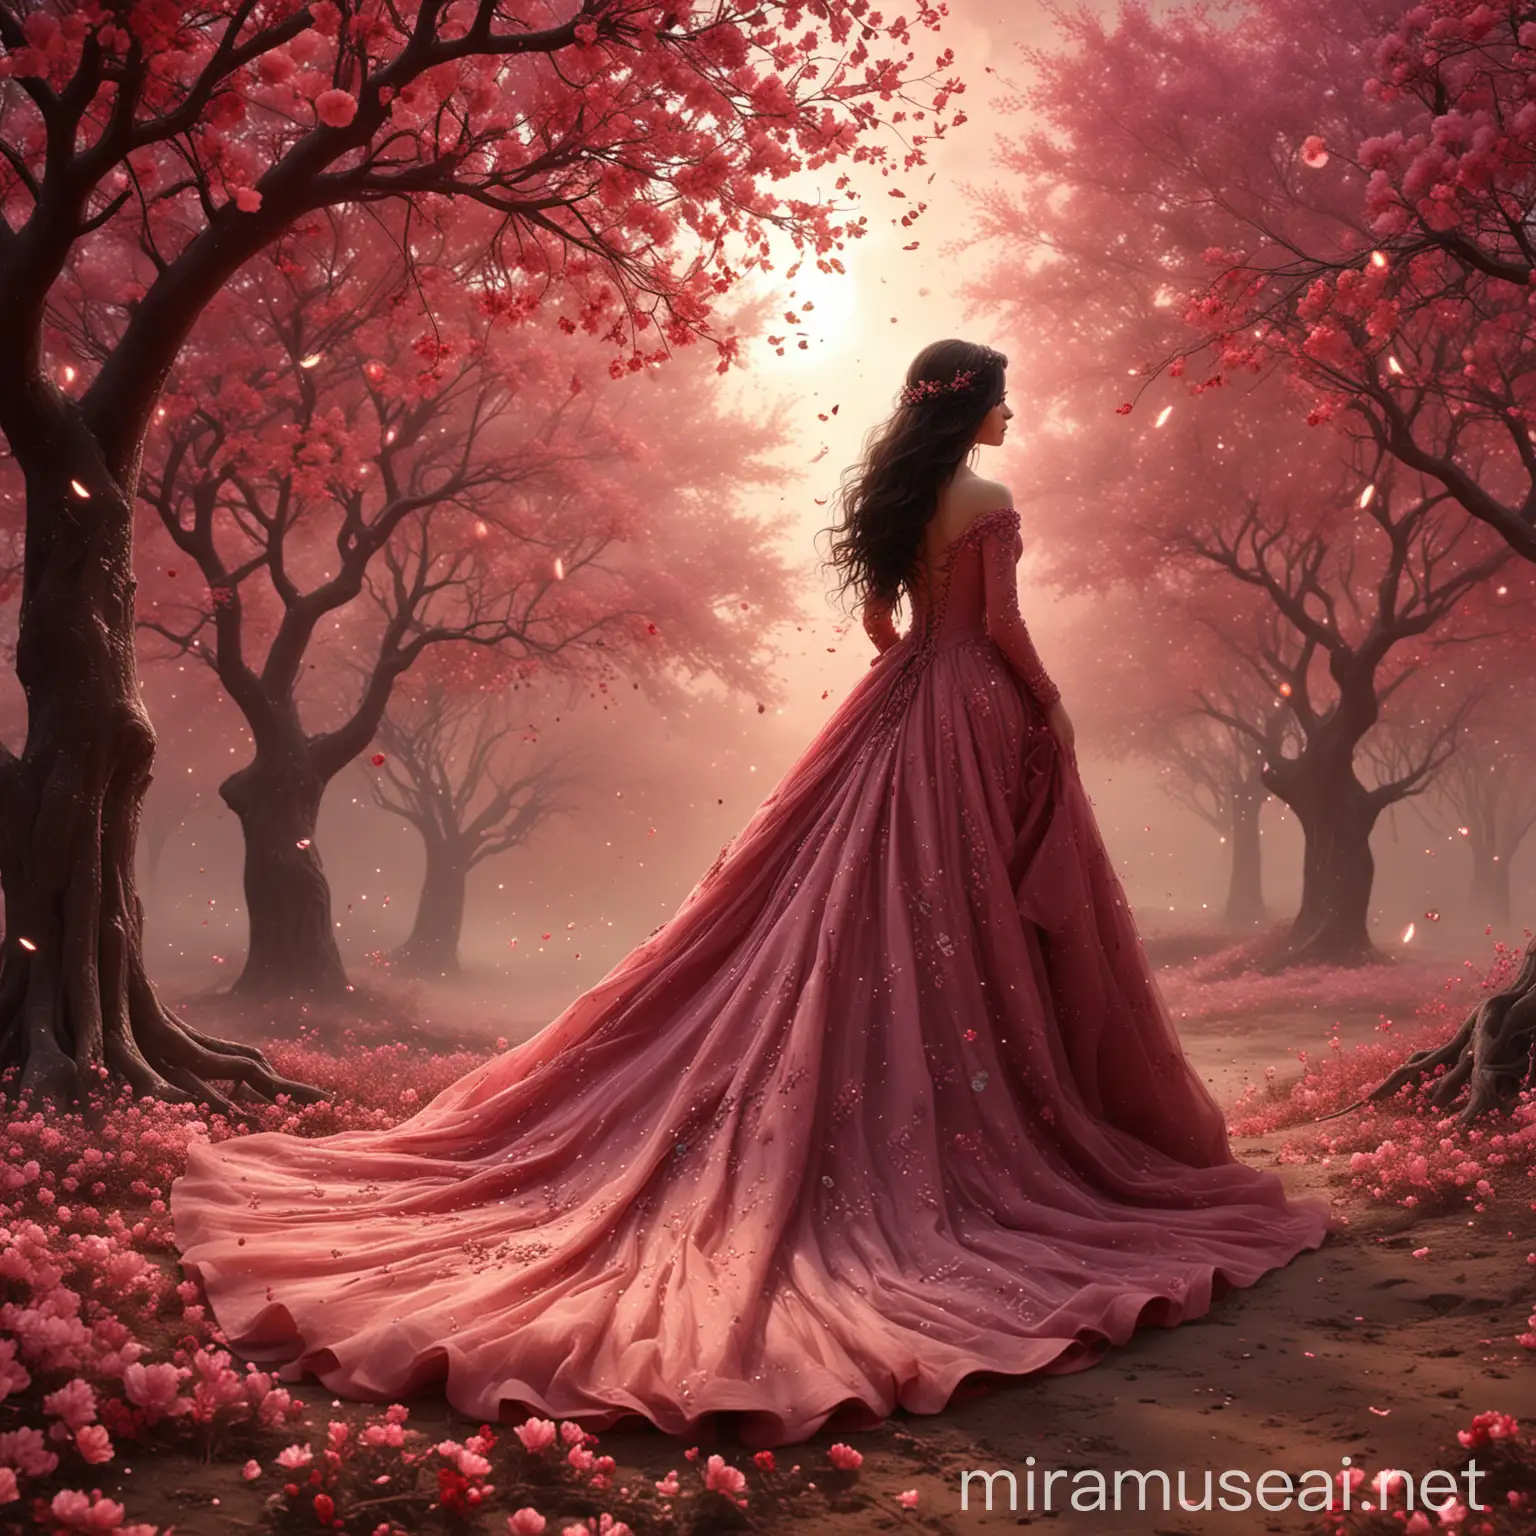 Elegant Woman Collecting Wishes in Fantasy Sky